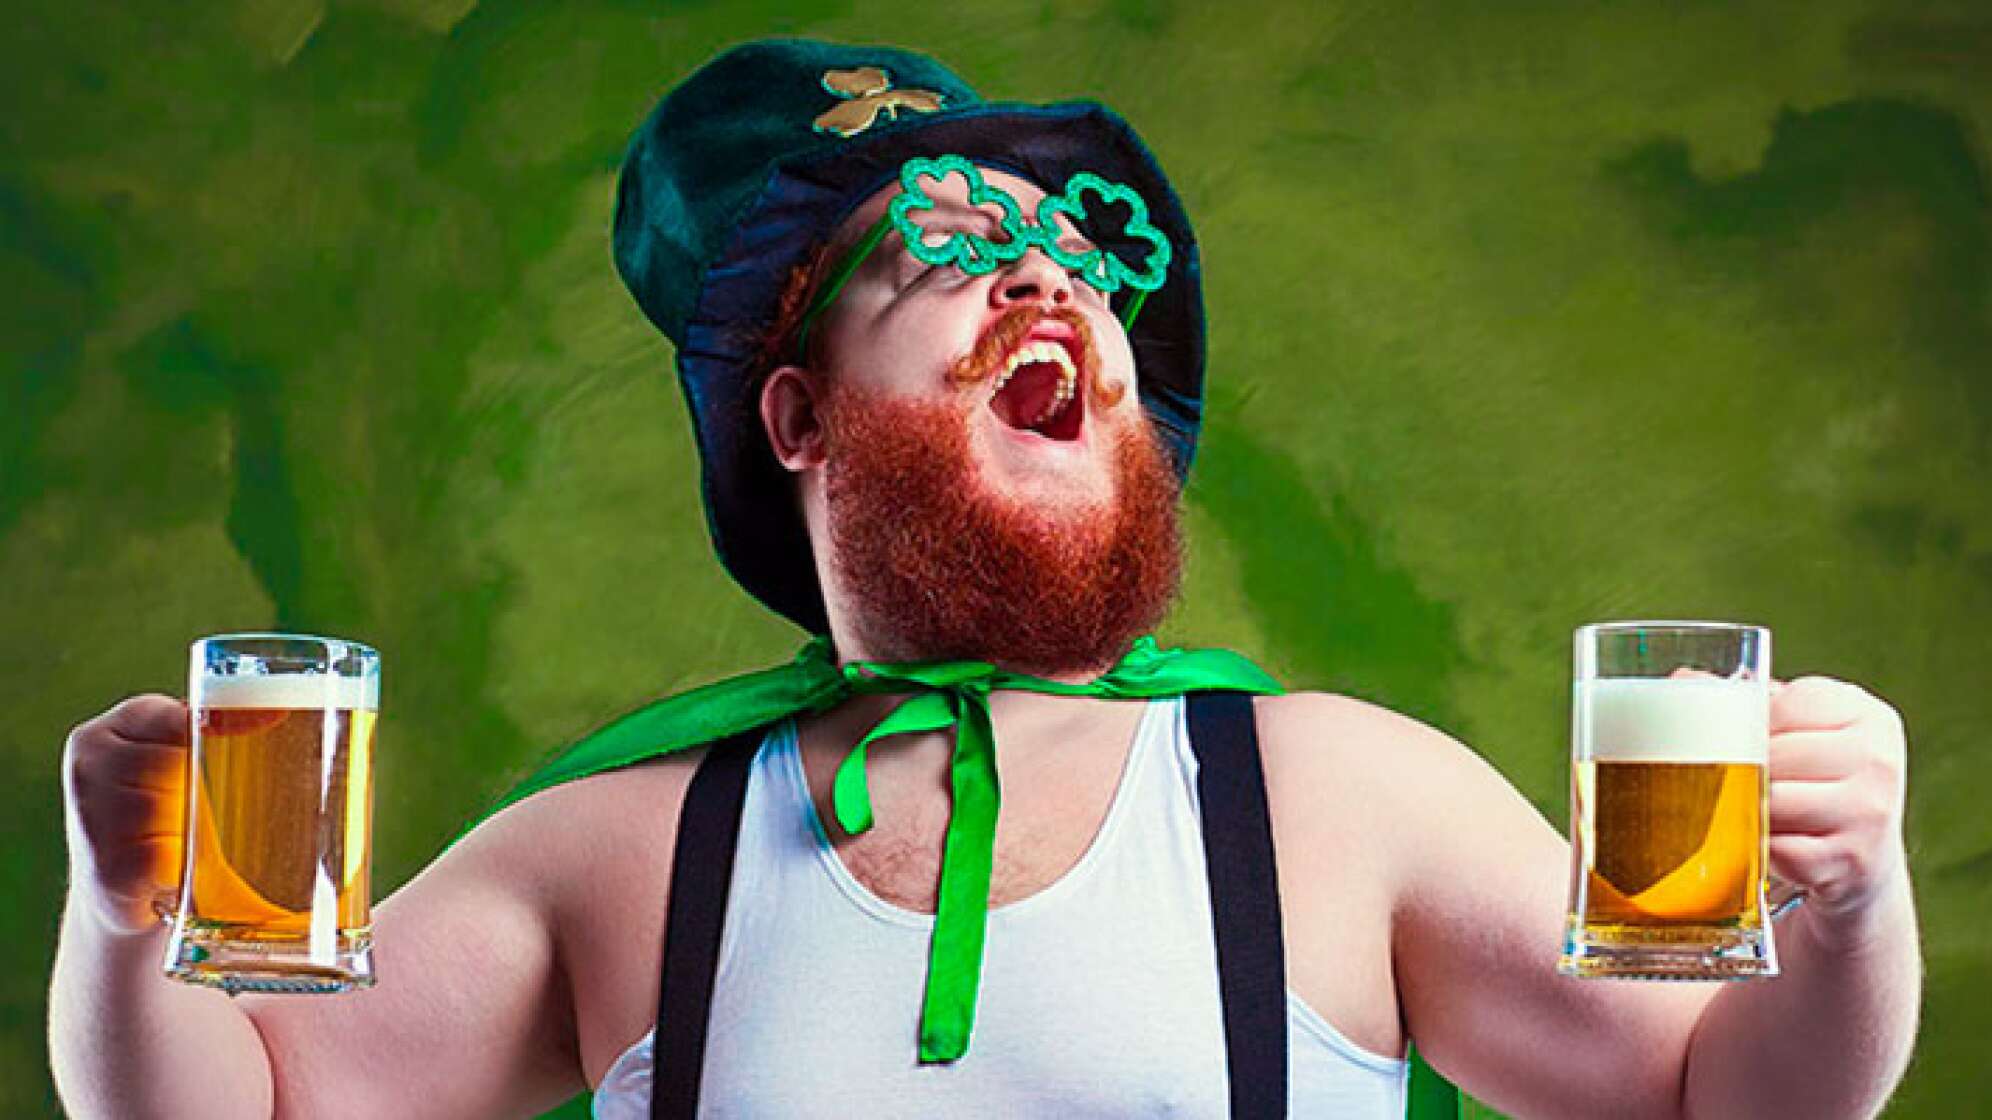 A fat man with a beard in St. Patrick's suit is smiling with a mug of beer on a green background.